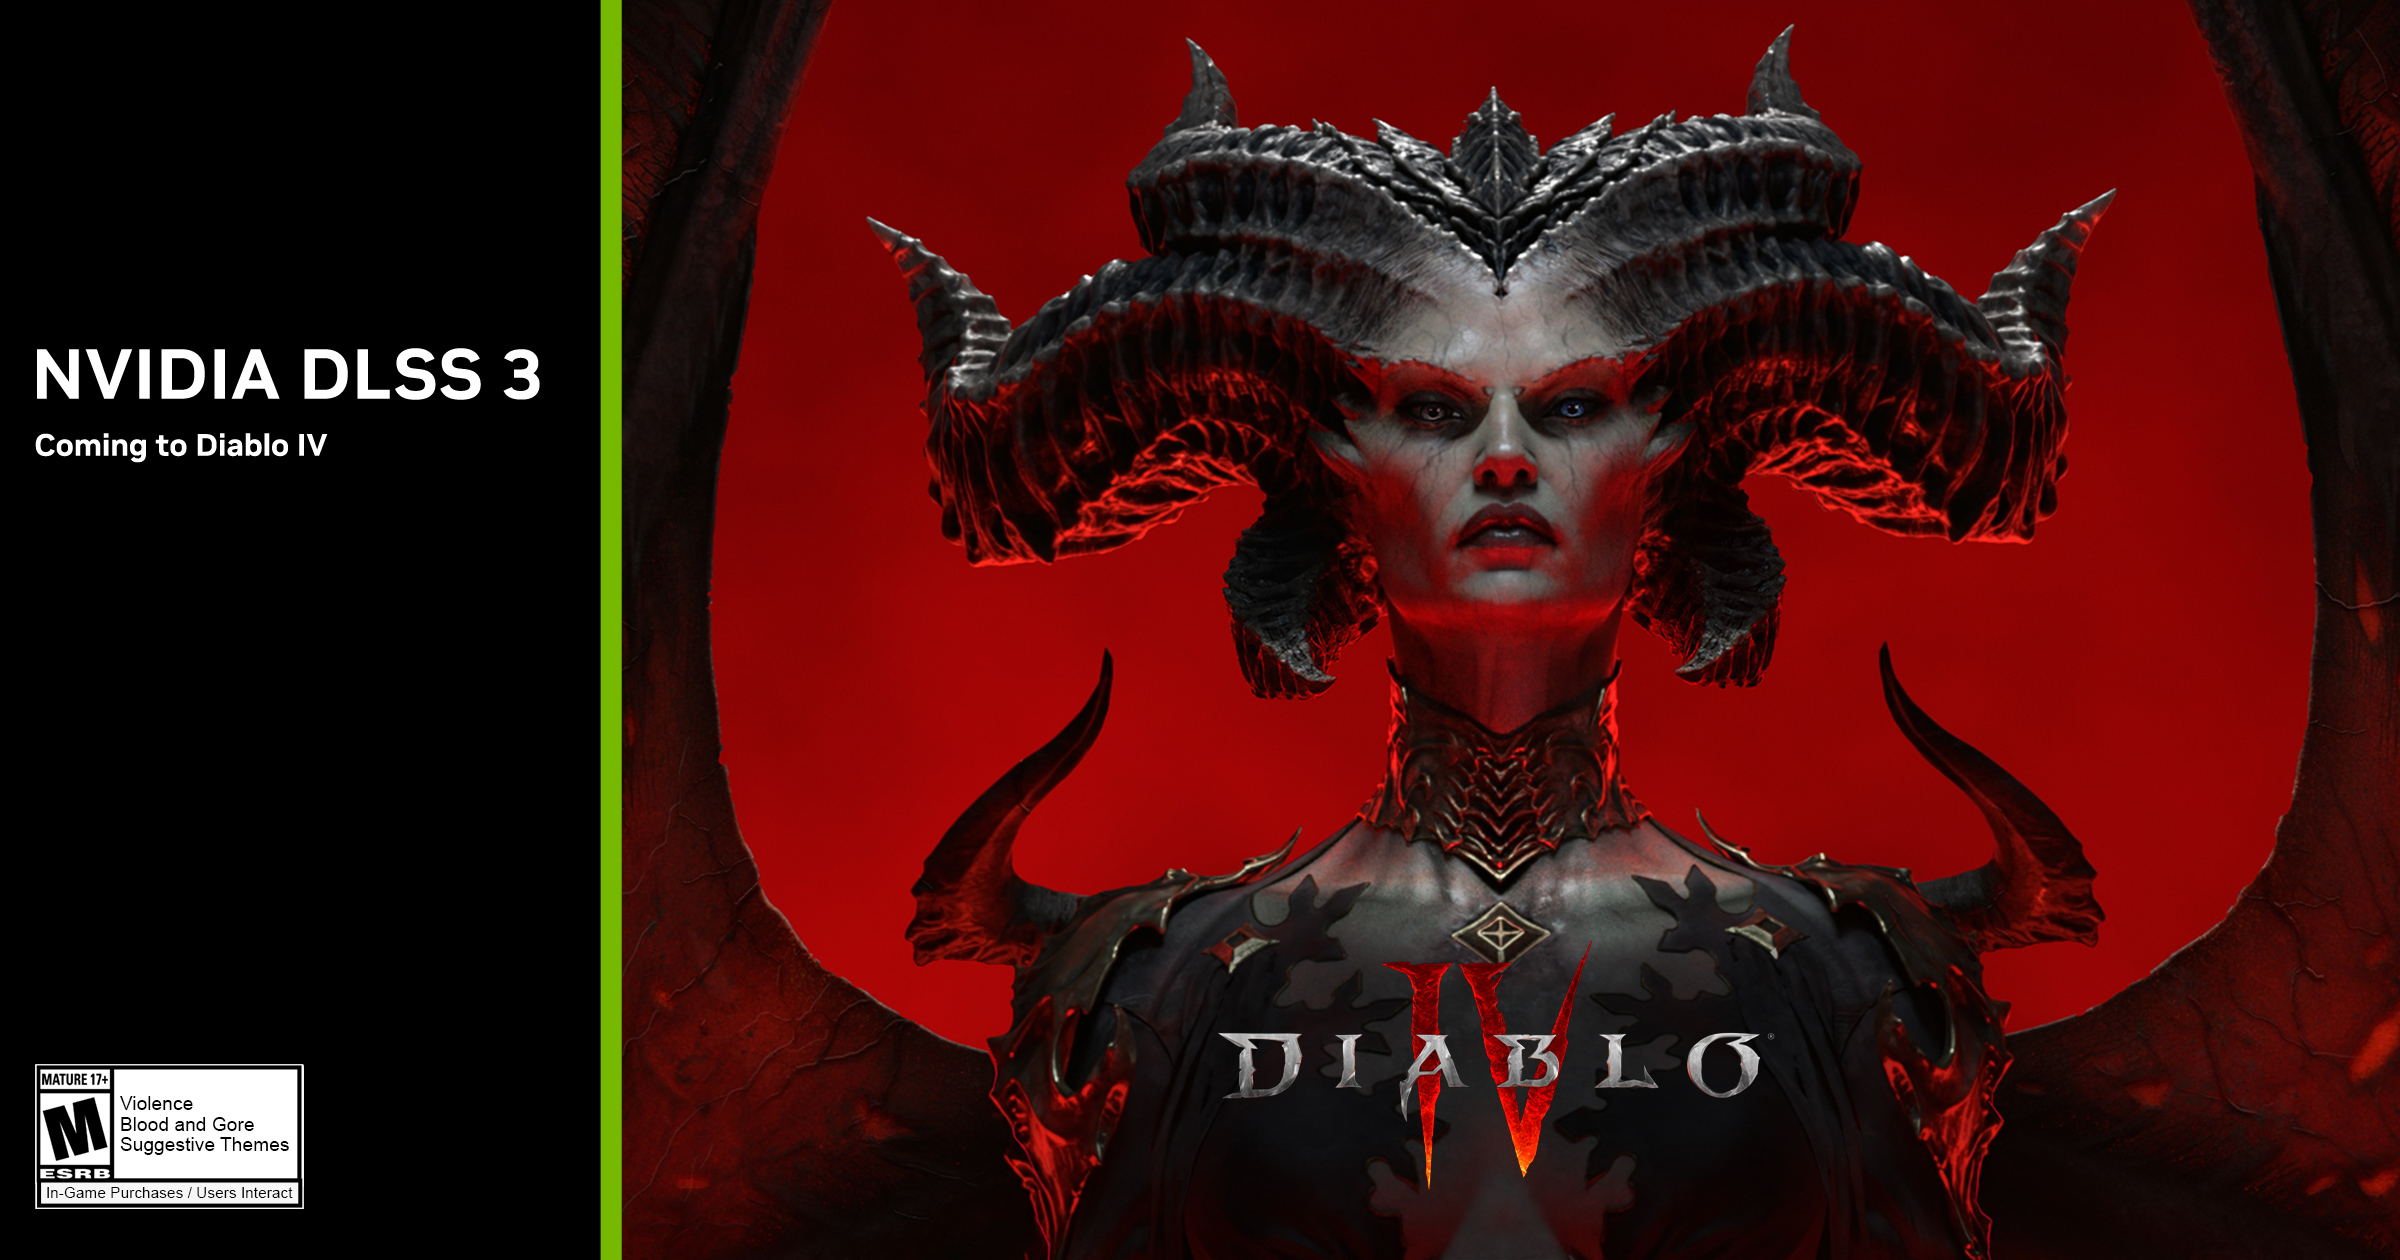 Diablo 4's beta has reportedly been added to the Battle.net launcher